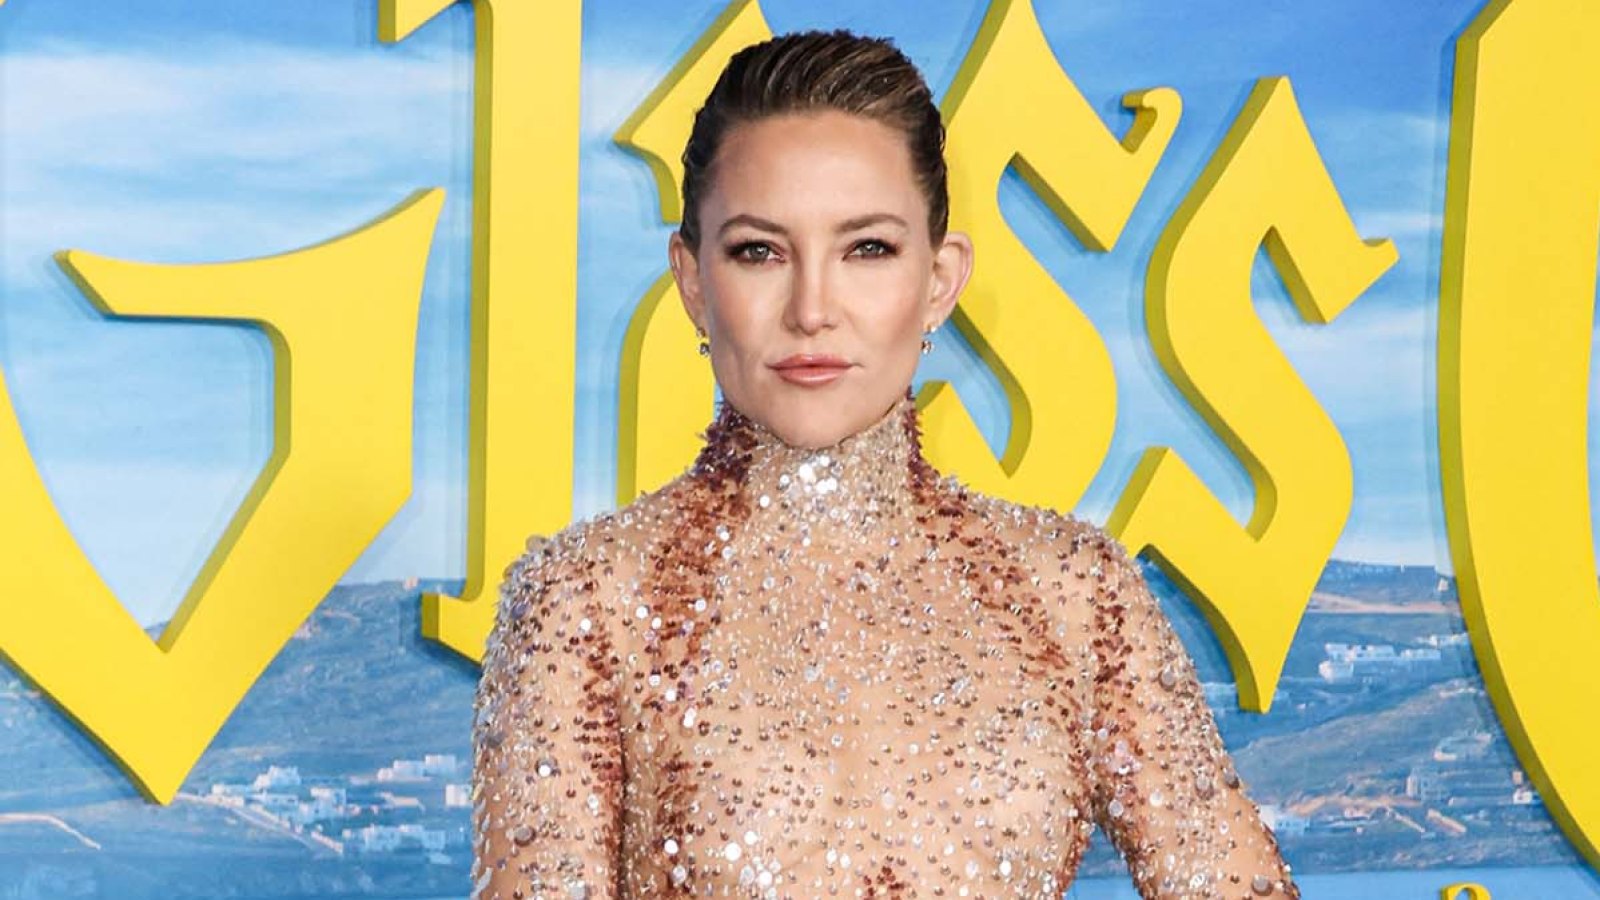 Kate Hudson Says She May Not Be Done Having Kids